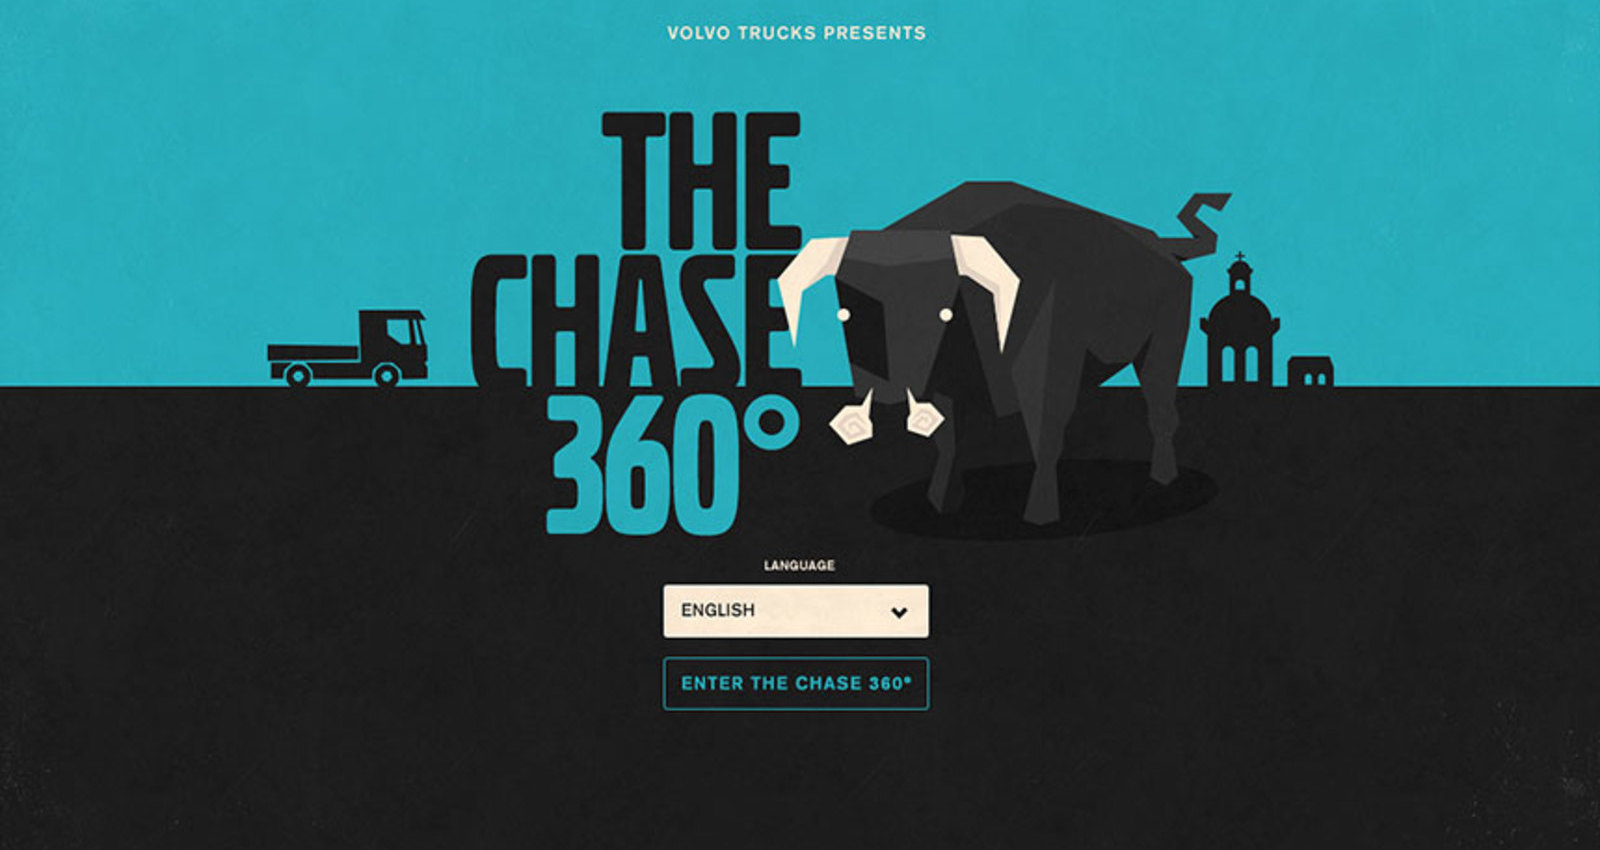 The Chase 360